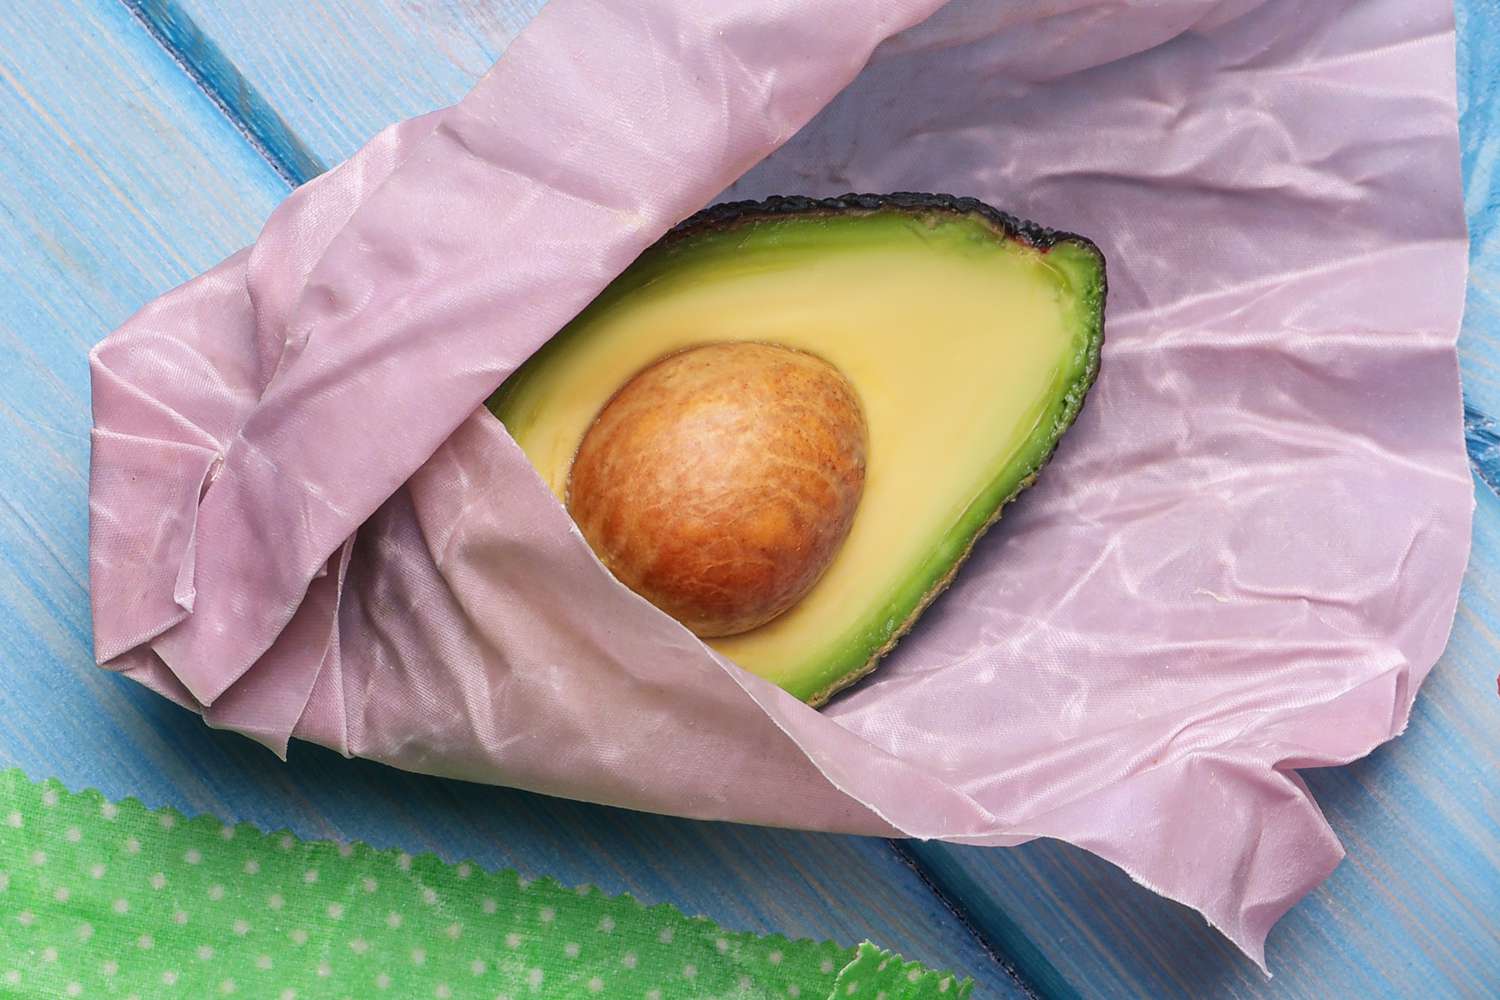 How To Store The Other Half Of An Avocado